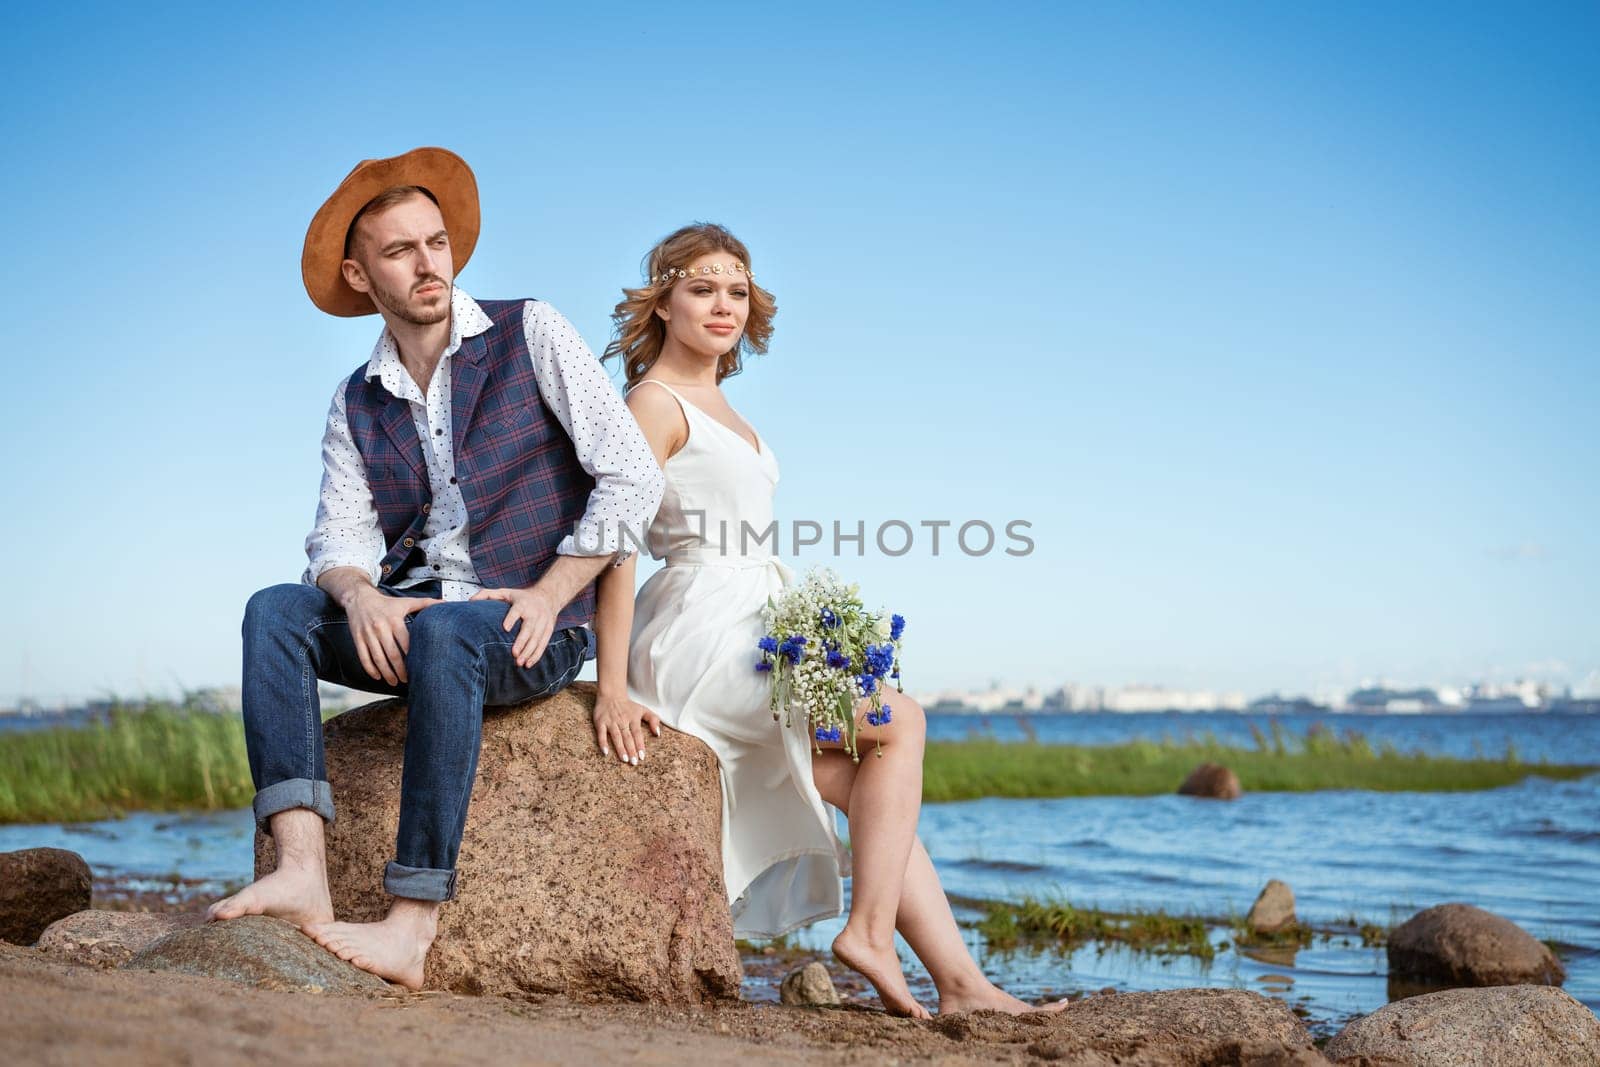 happy caucasian couple man and woman on the beach, summer day holding a bouquet of flowers in her hand